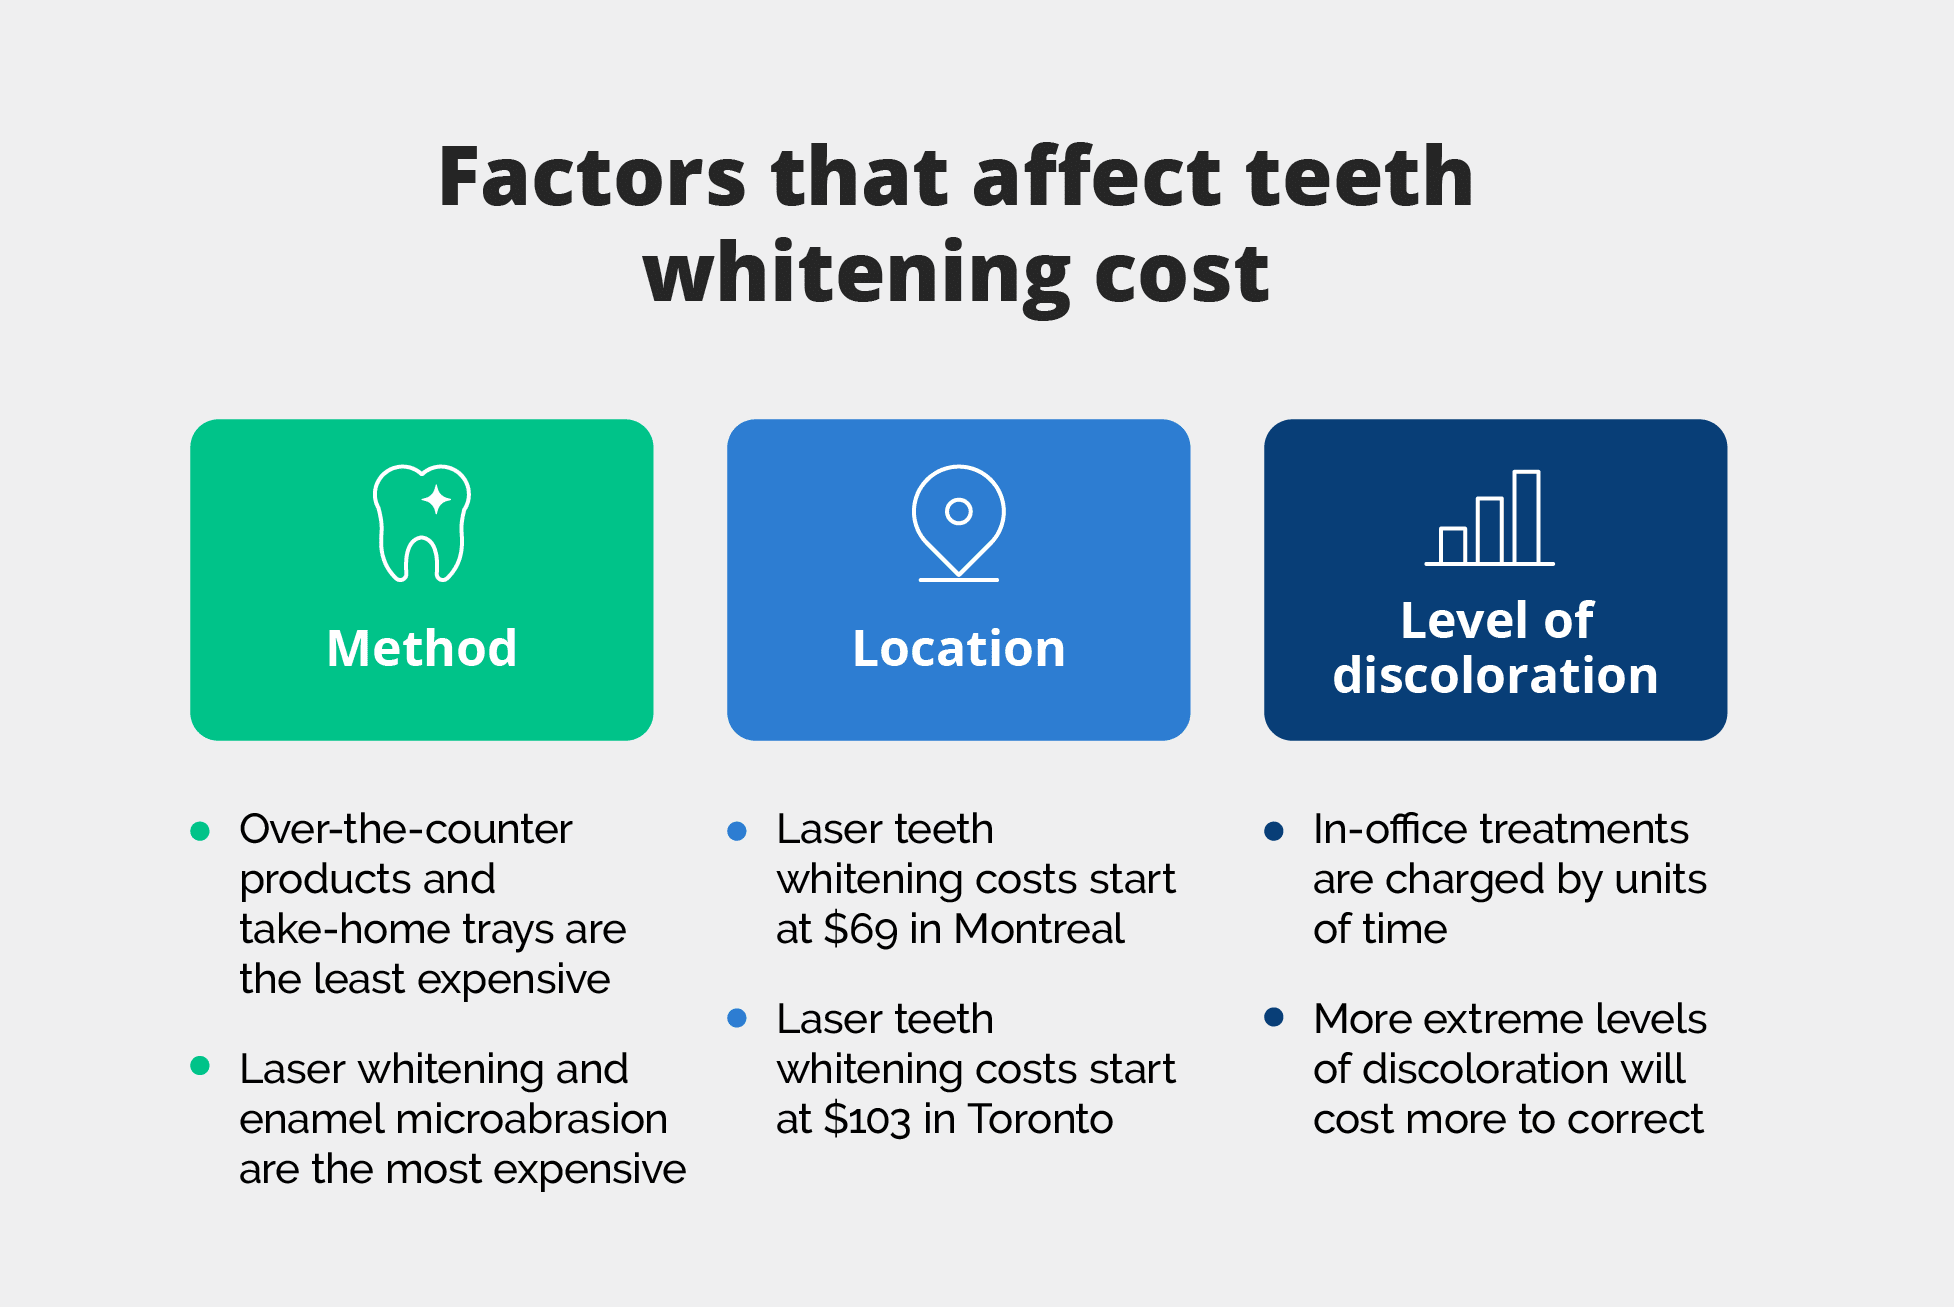 factors that affect teeth whitening cost: method; location; level of discoloration